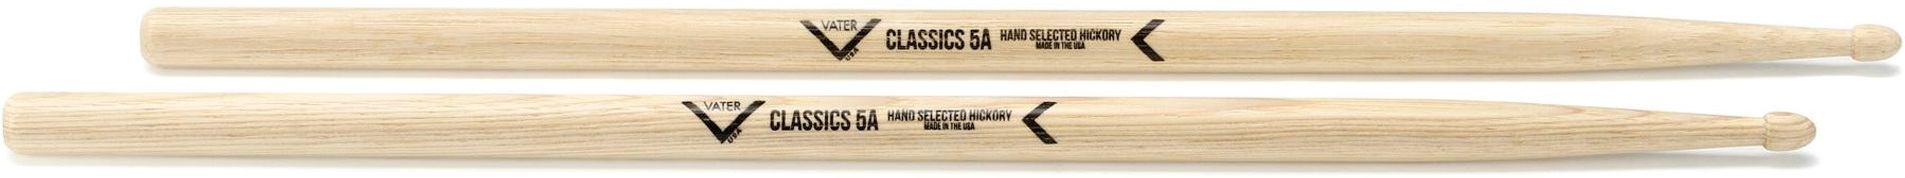 Vater Hickory Classics 5a - Drum stick - Main picture